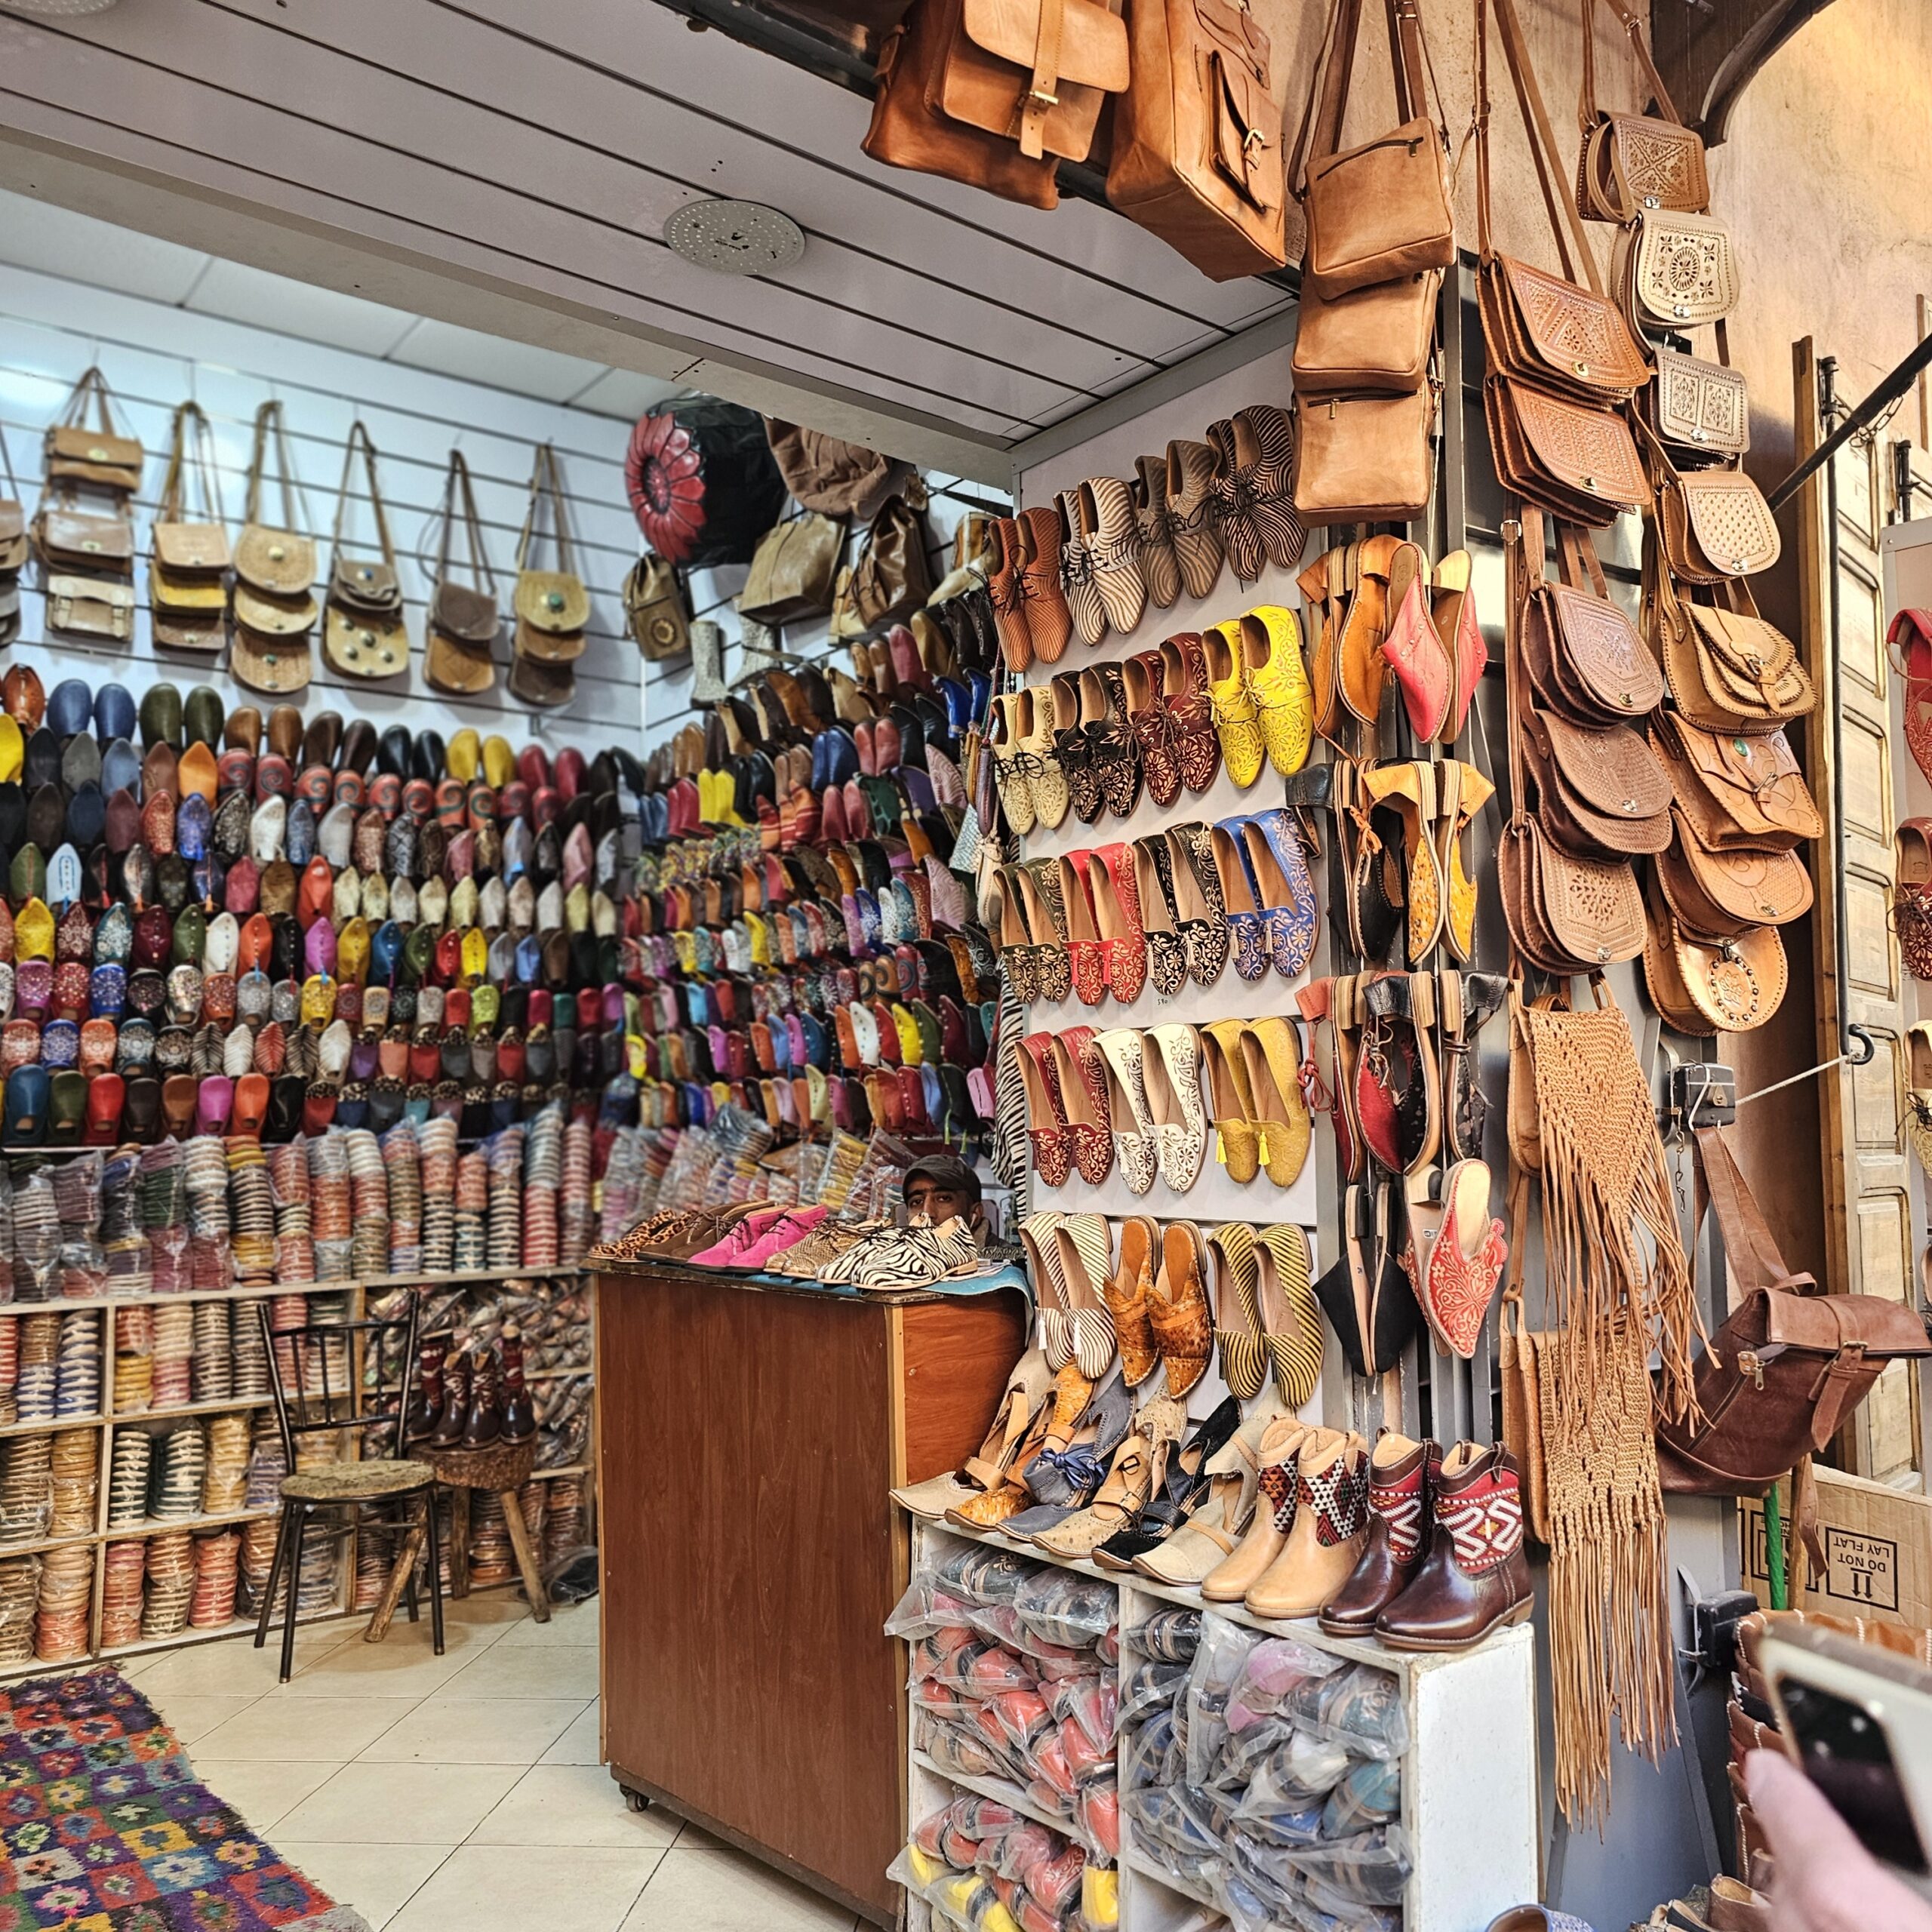 A stall selling Moroccan leather bags and shoes in a souk in Jemaa El Fnaa, Marrakesh. Image by 360onhistory.com